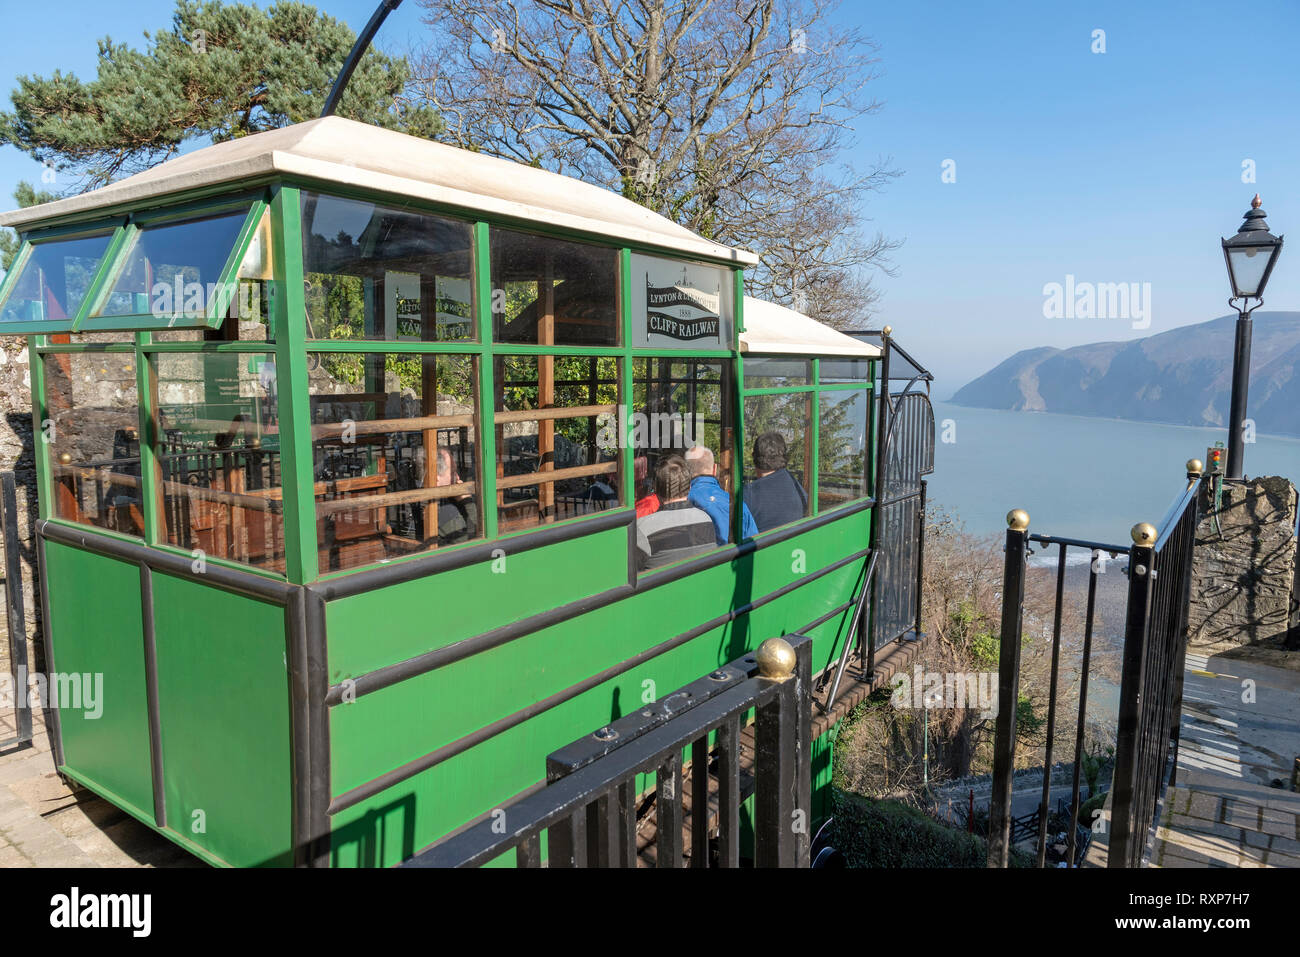 Lynton, Devon, England, UK. March 2019. The Lynton & Lynmouth cliff railway which operates on water power between the two towns  of Lynton & Lynmouth Stock Photo